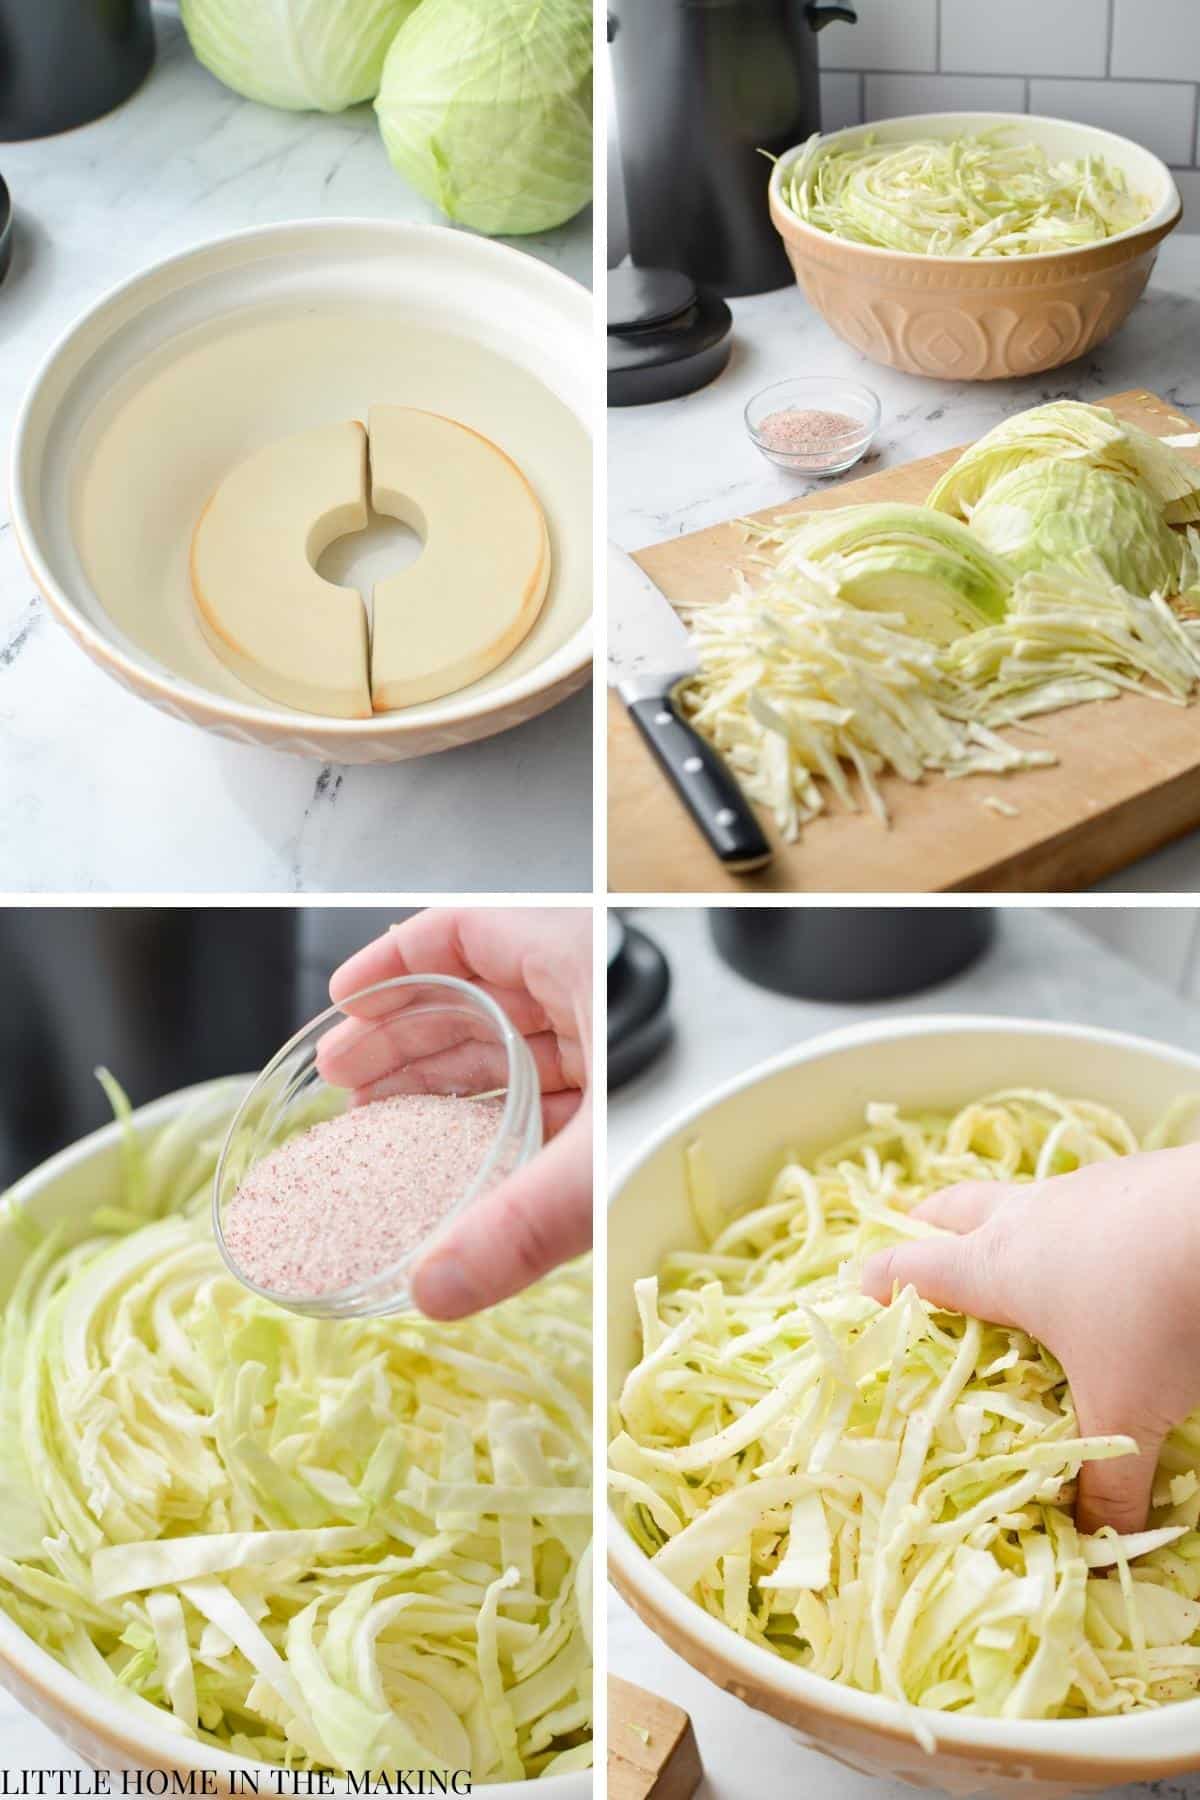 Shredded cabbage and tossing it with salt to make into sauerkraut.